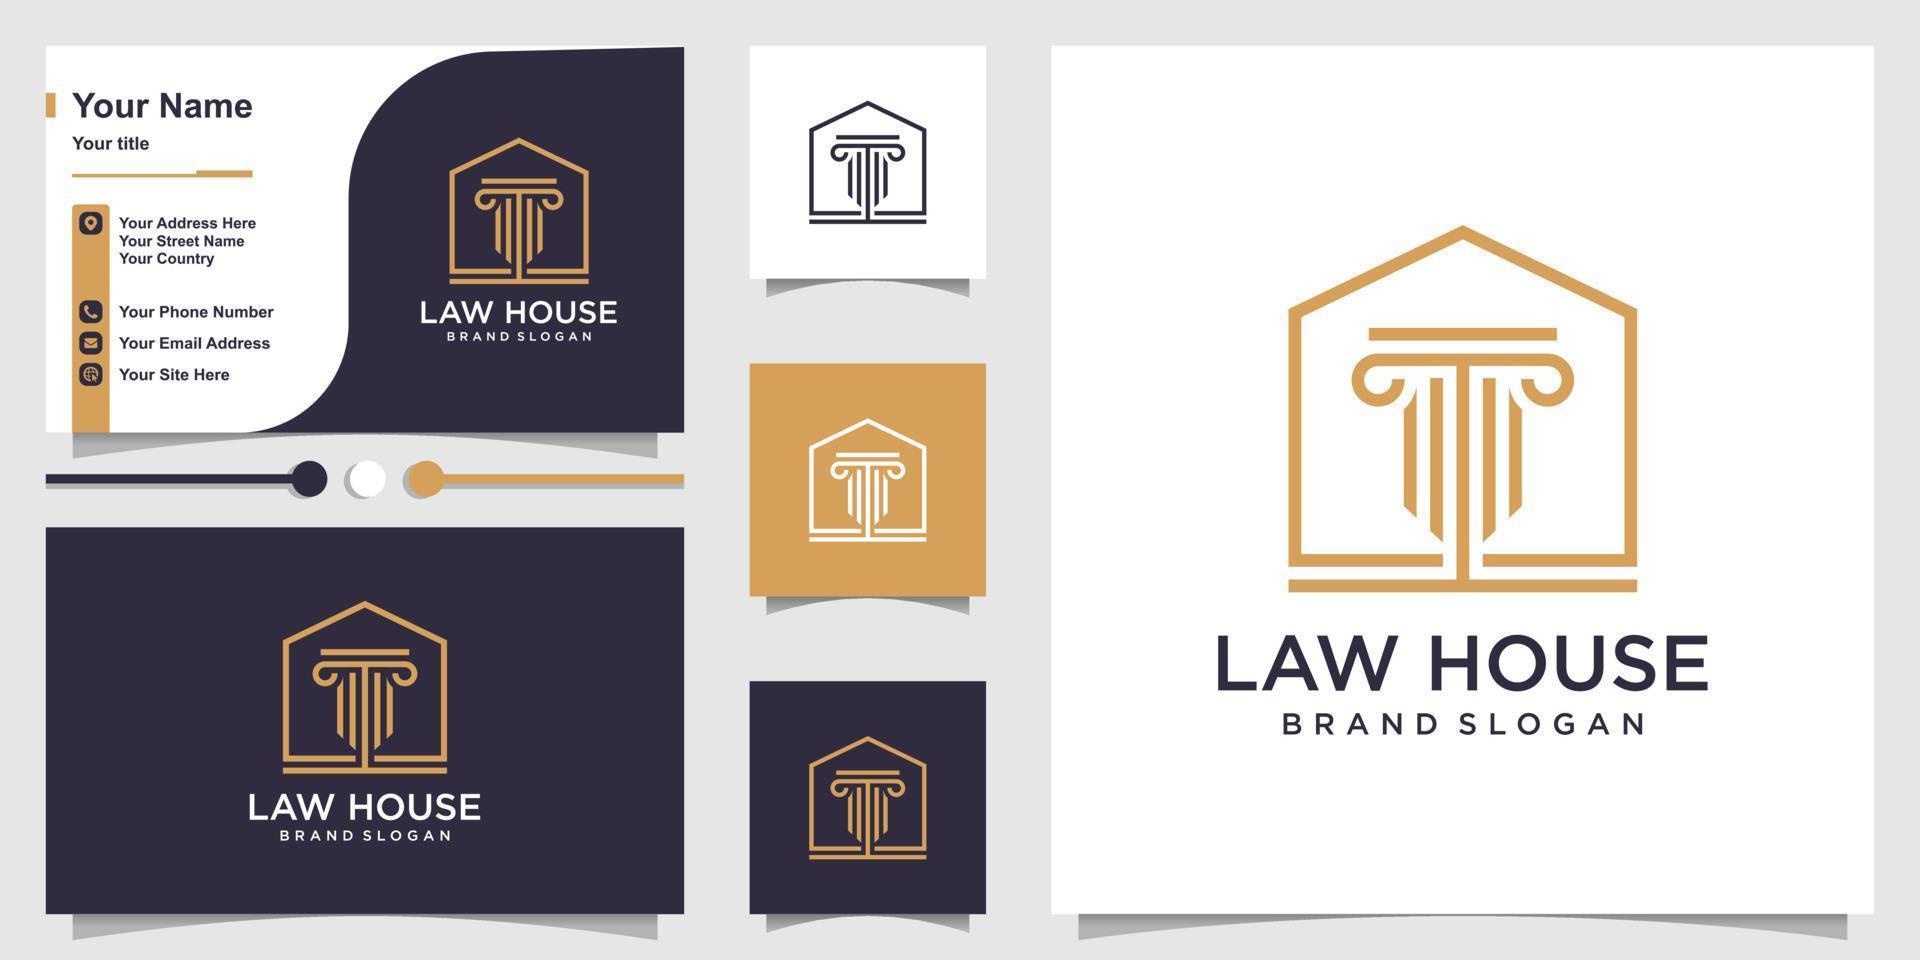 Law logo with line art house concept and business card design Premium Vector